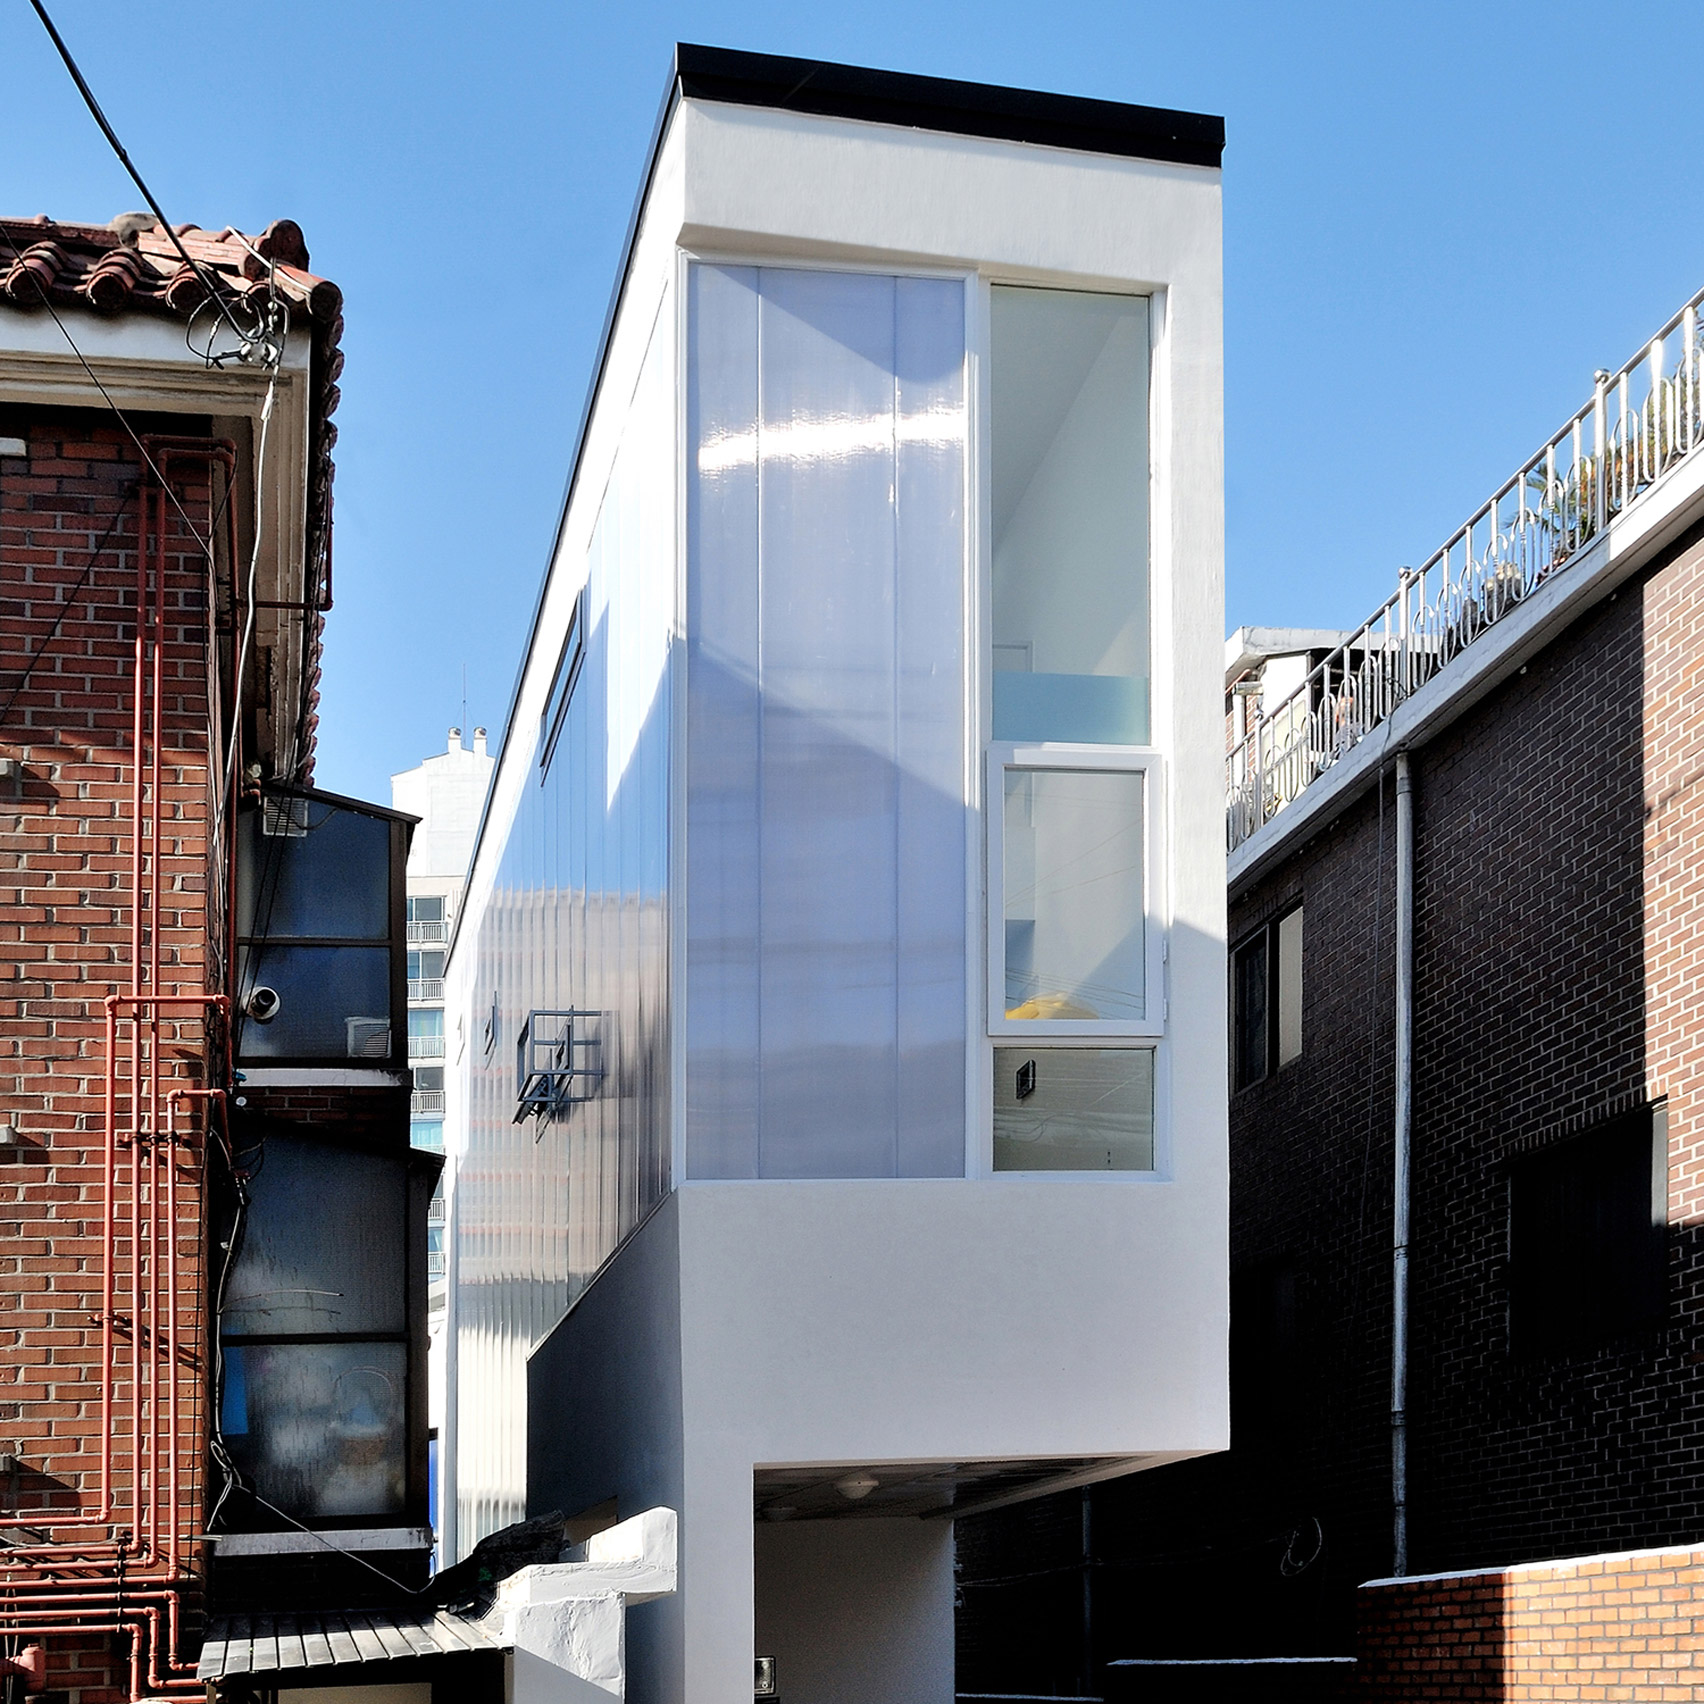 Guro-dong Mini House by AIN Group